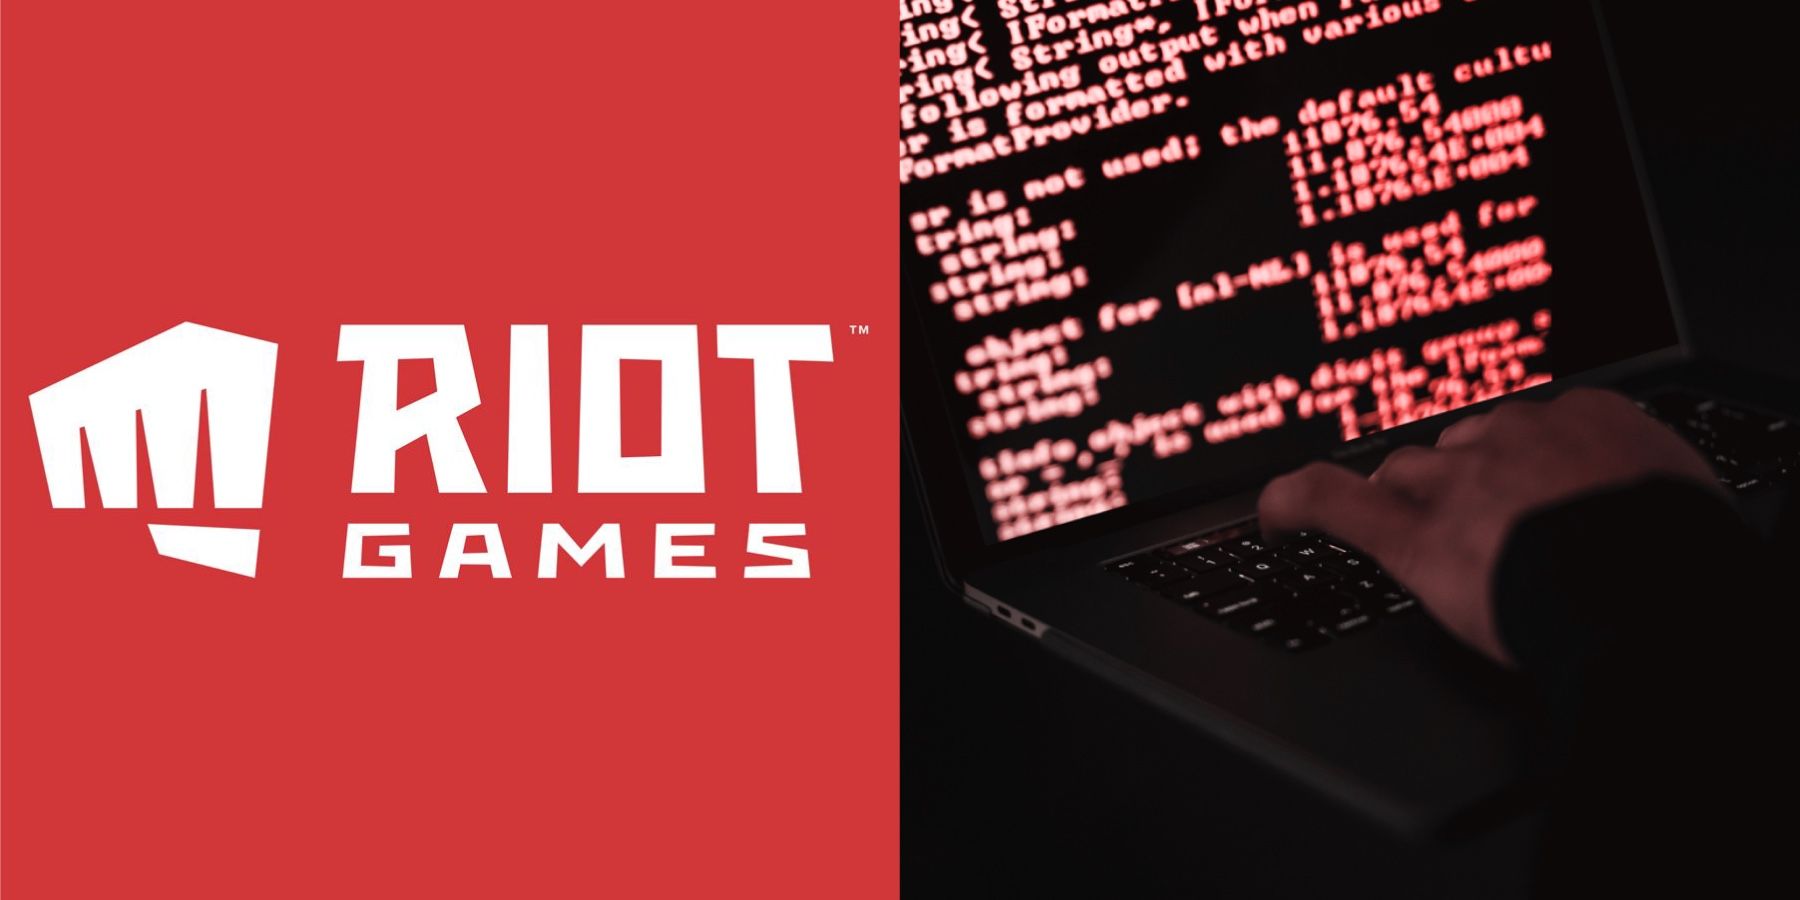 Riot Games responds to League of Legends source code theft & ransom